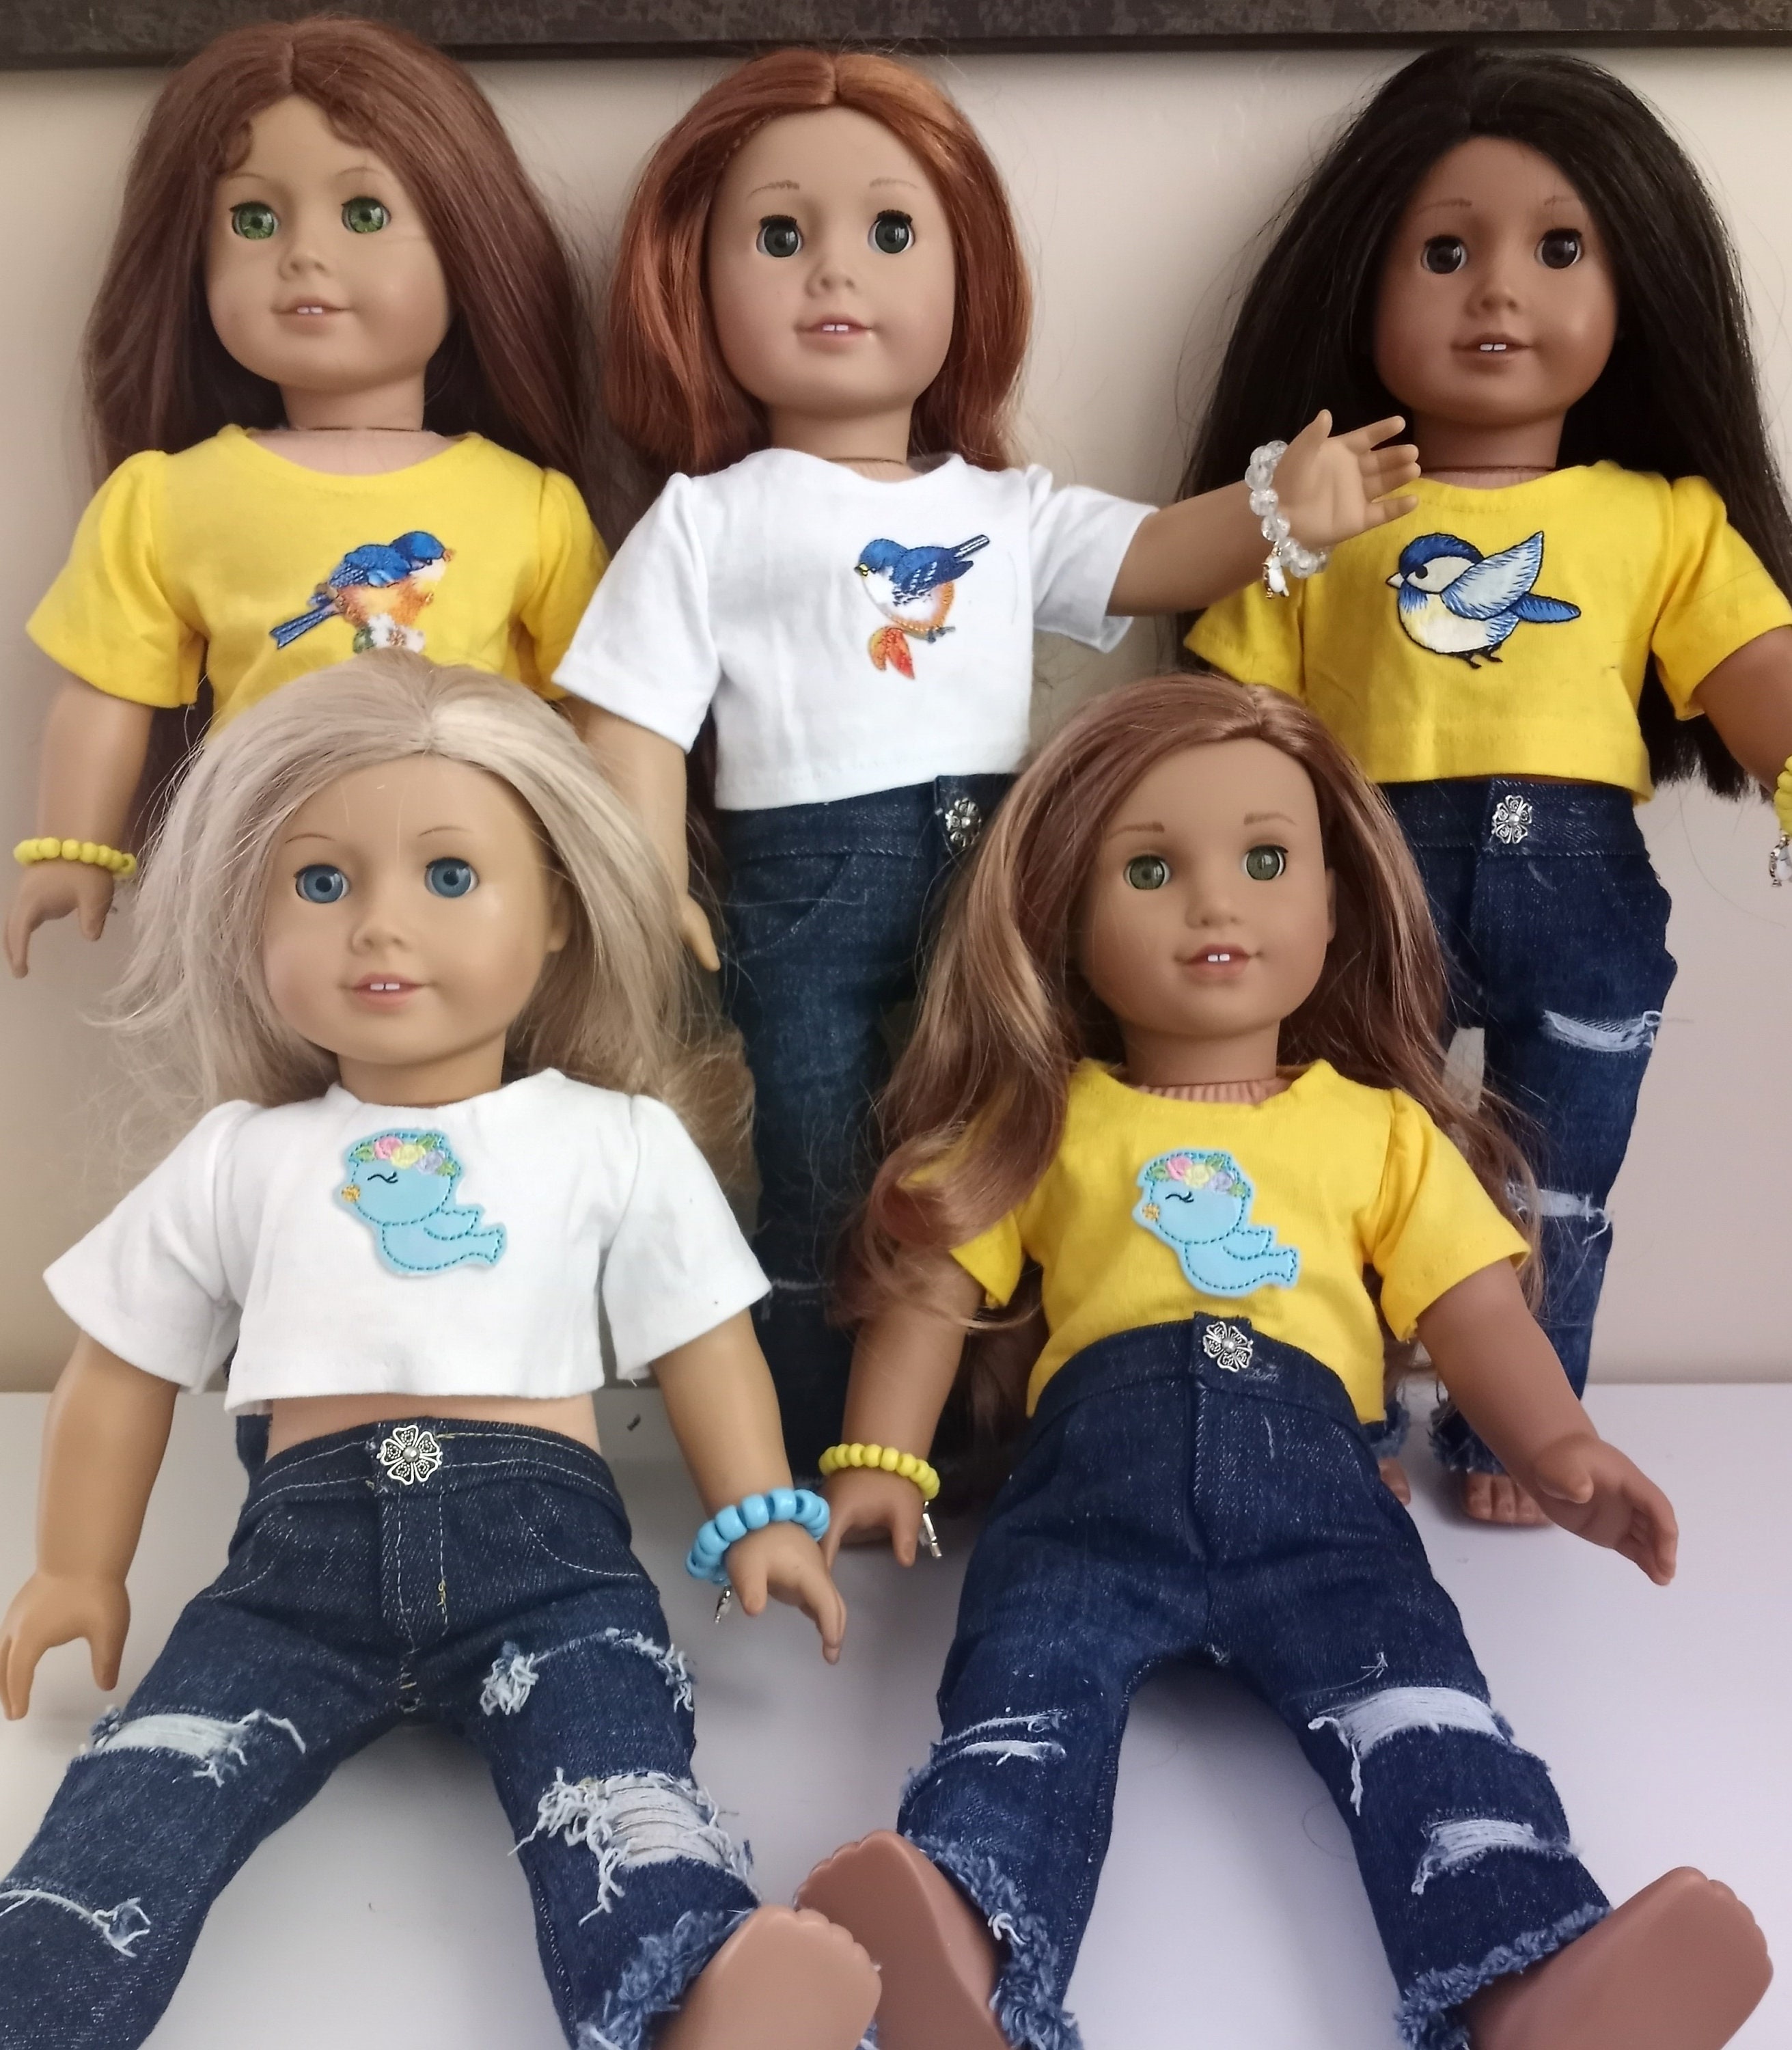 Doll Clothes Fashion Blouse Jeans Shorts For American Girl Dolls